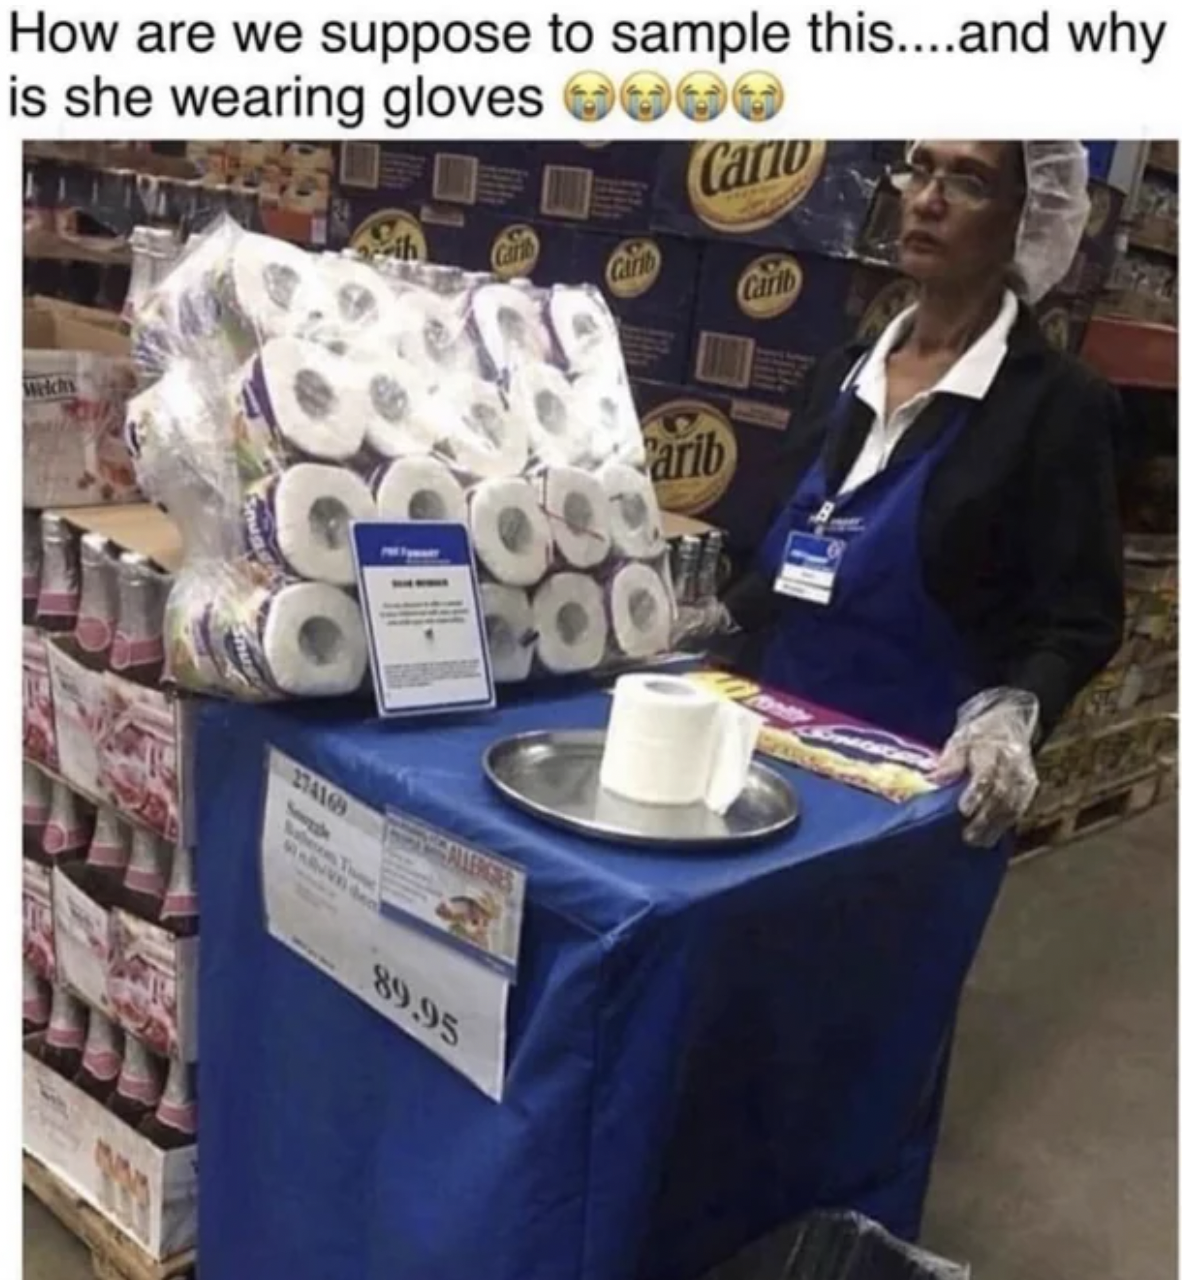 Fails and Facepalms - How are we suppose to sample this....and why is she wearing gloves